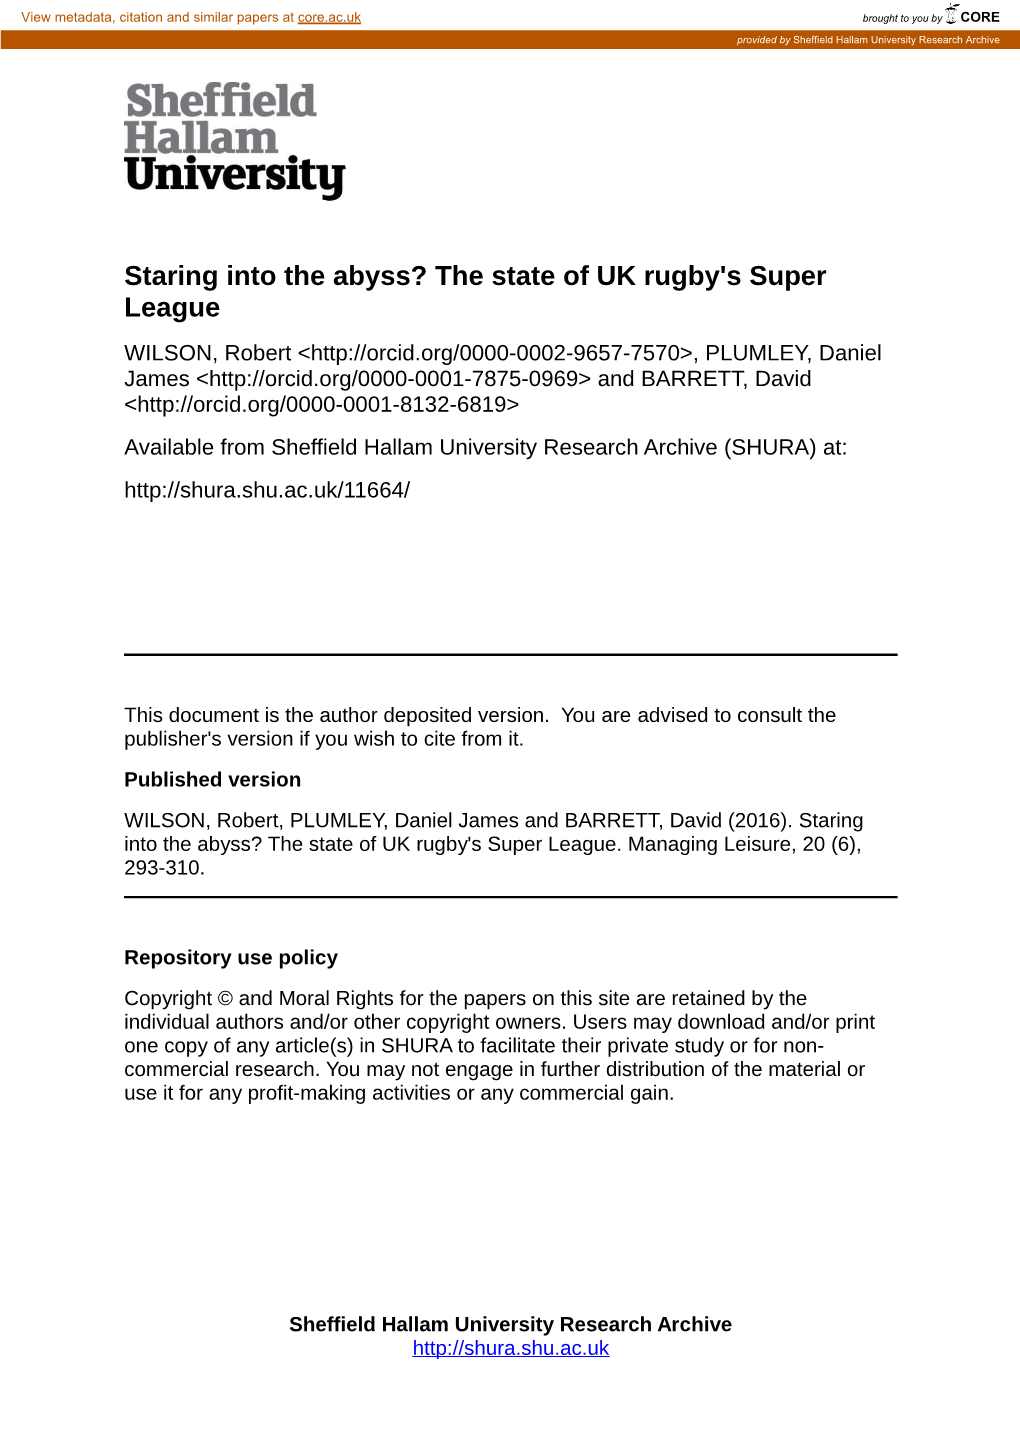 Staring Into the Abyss? the State of UK Rugby's Super League